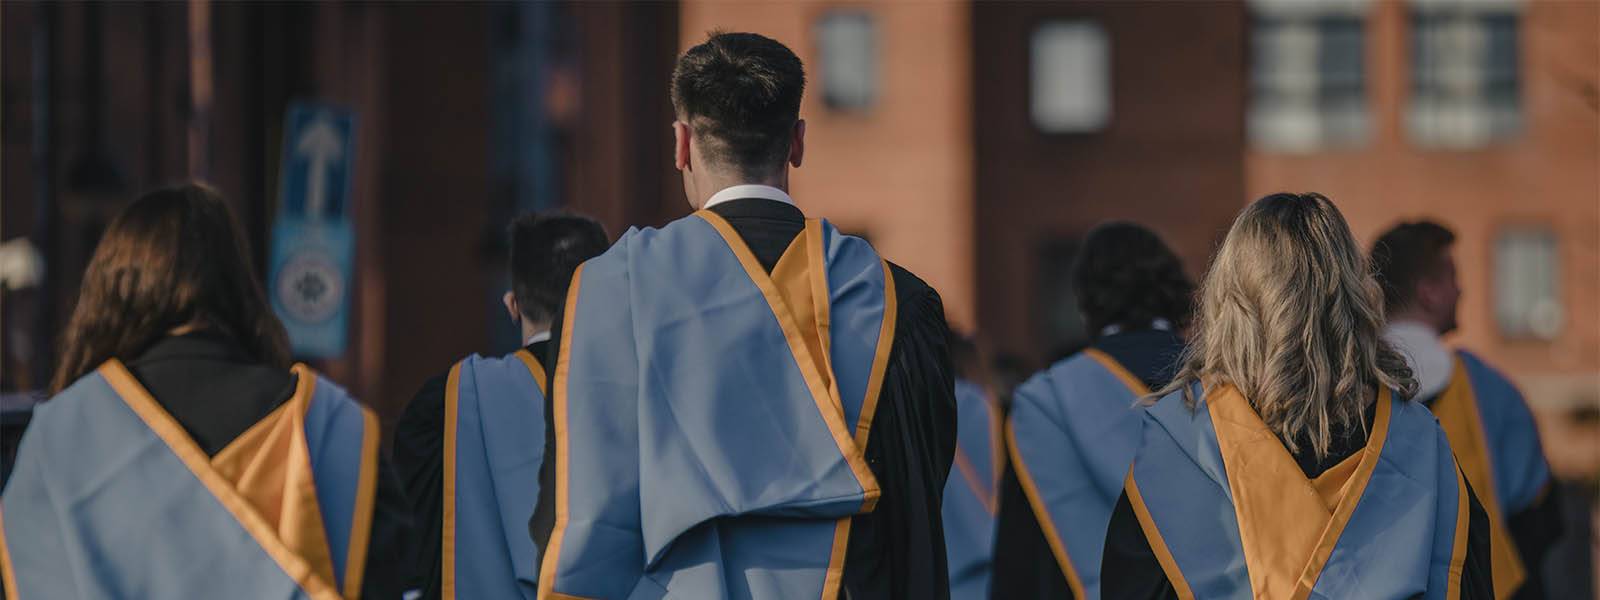 On graduation day | Imperial students | Imperial College London